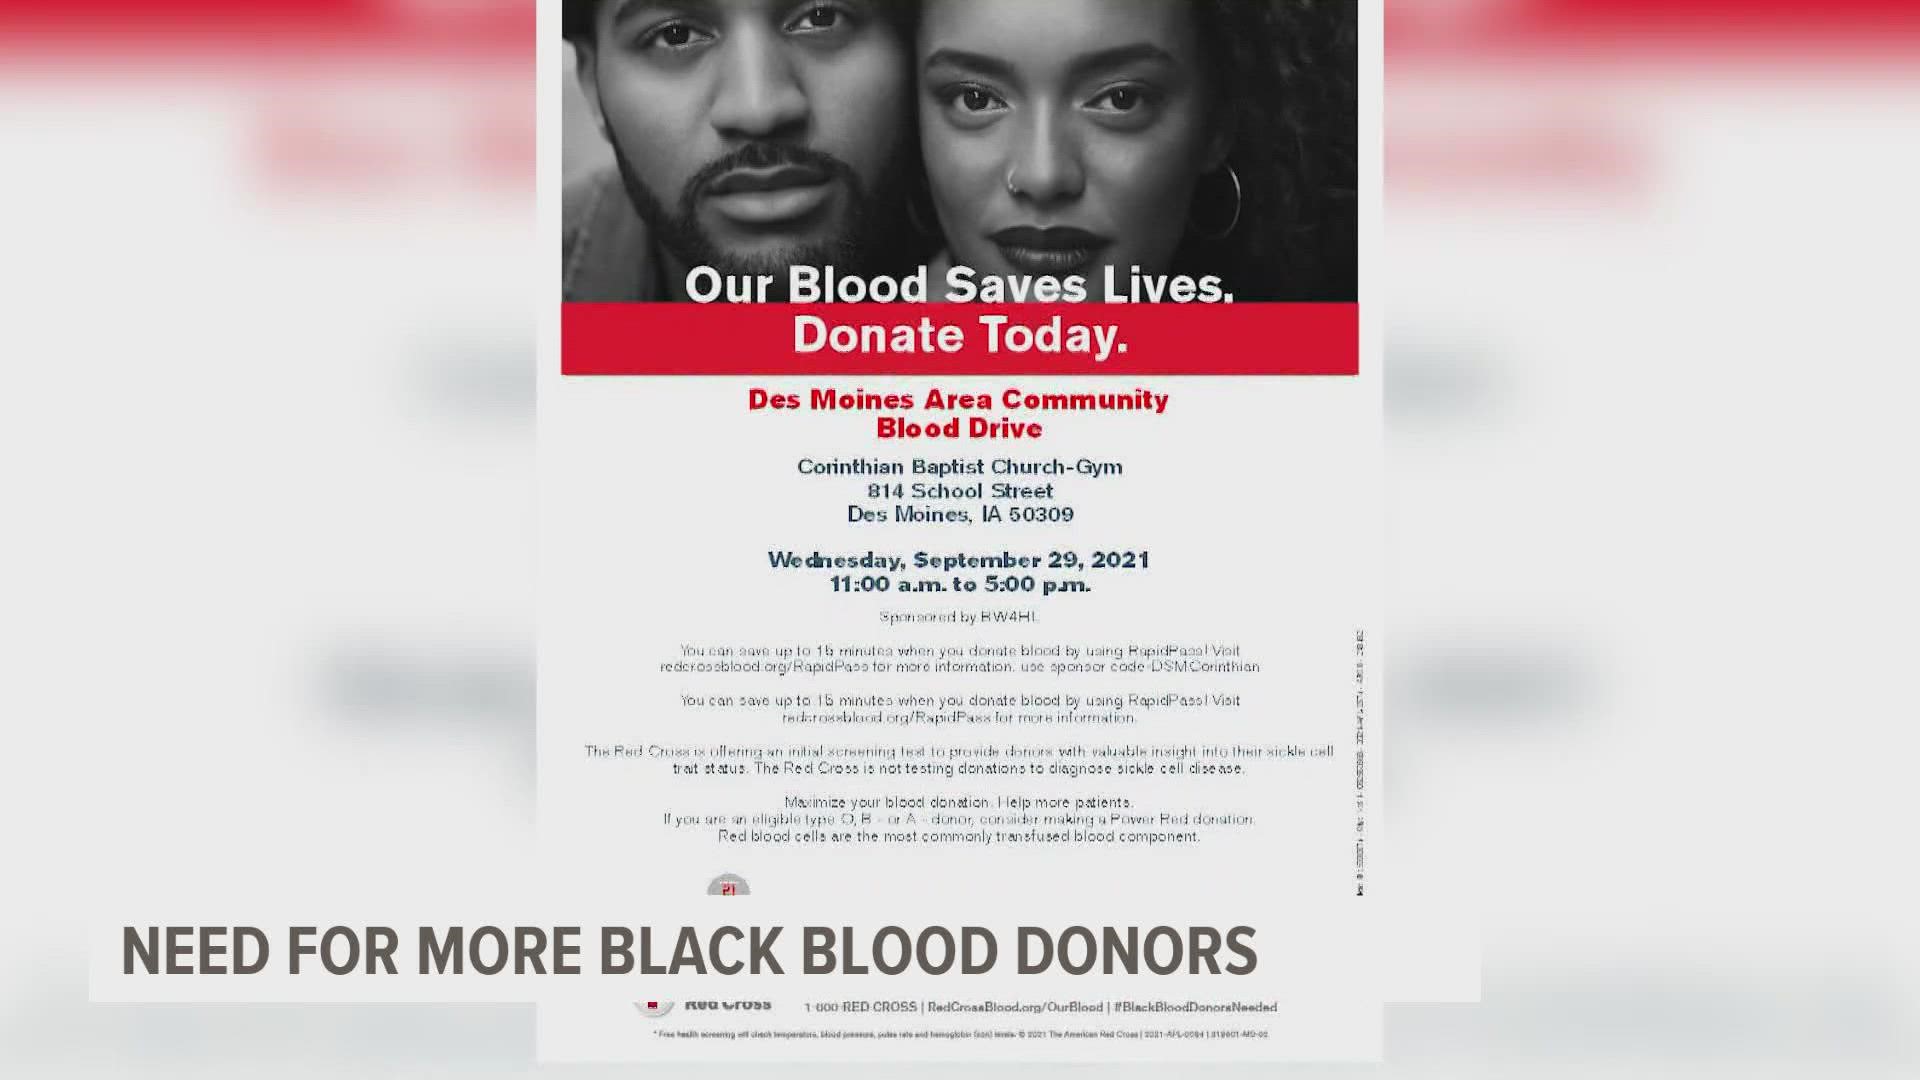 Black Women 4 Healthy Living is holding a blood drive on Sept. 29 at Corinthian Baptist Church in Des Moines from 11 a.m. - 5 p.m.